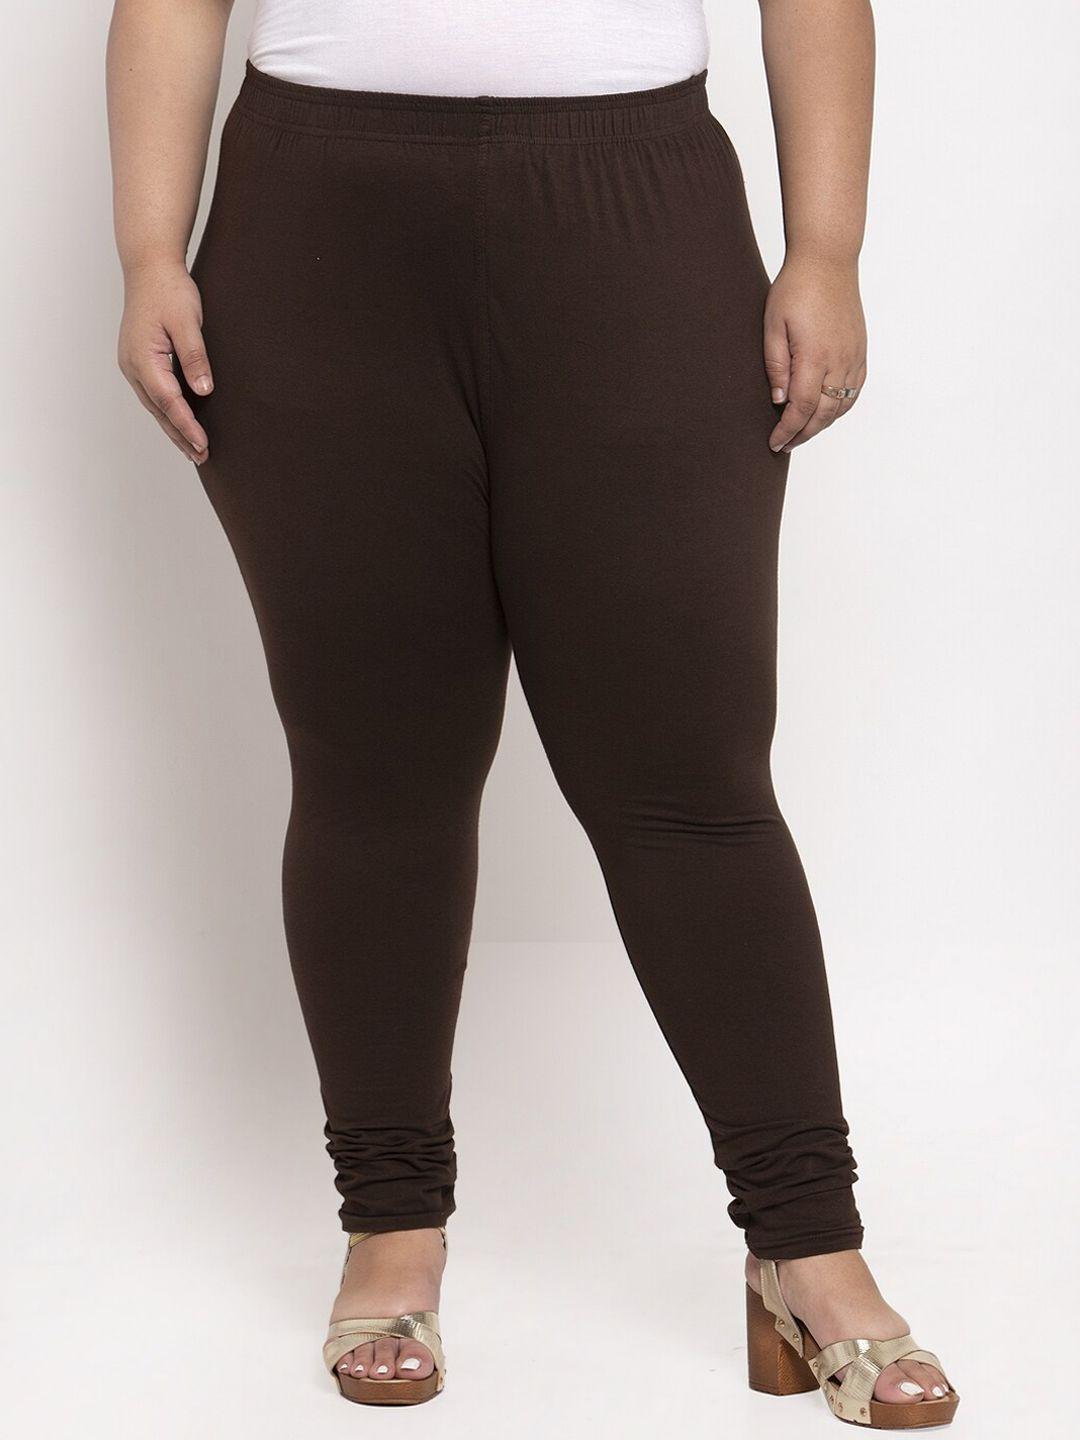 tag 7 plus women brown solid plus size ankle length leggings